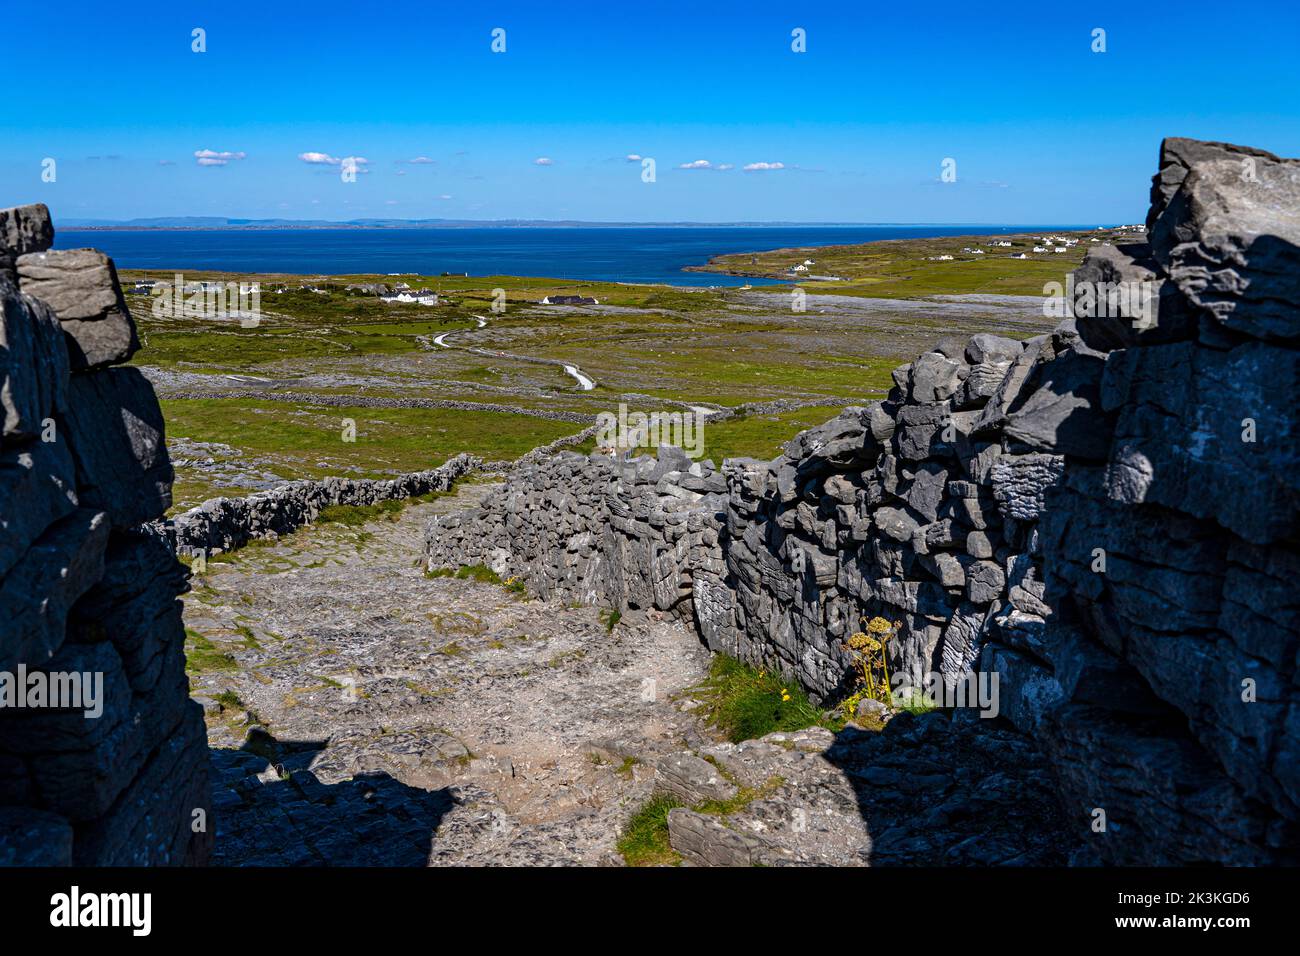 The ancient fortress of Dún Aonghasa or  Dún Aengus, Inishmore, the largest of the Aran Islands, Galway, Ireland Stock Photo